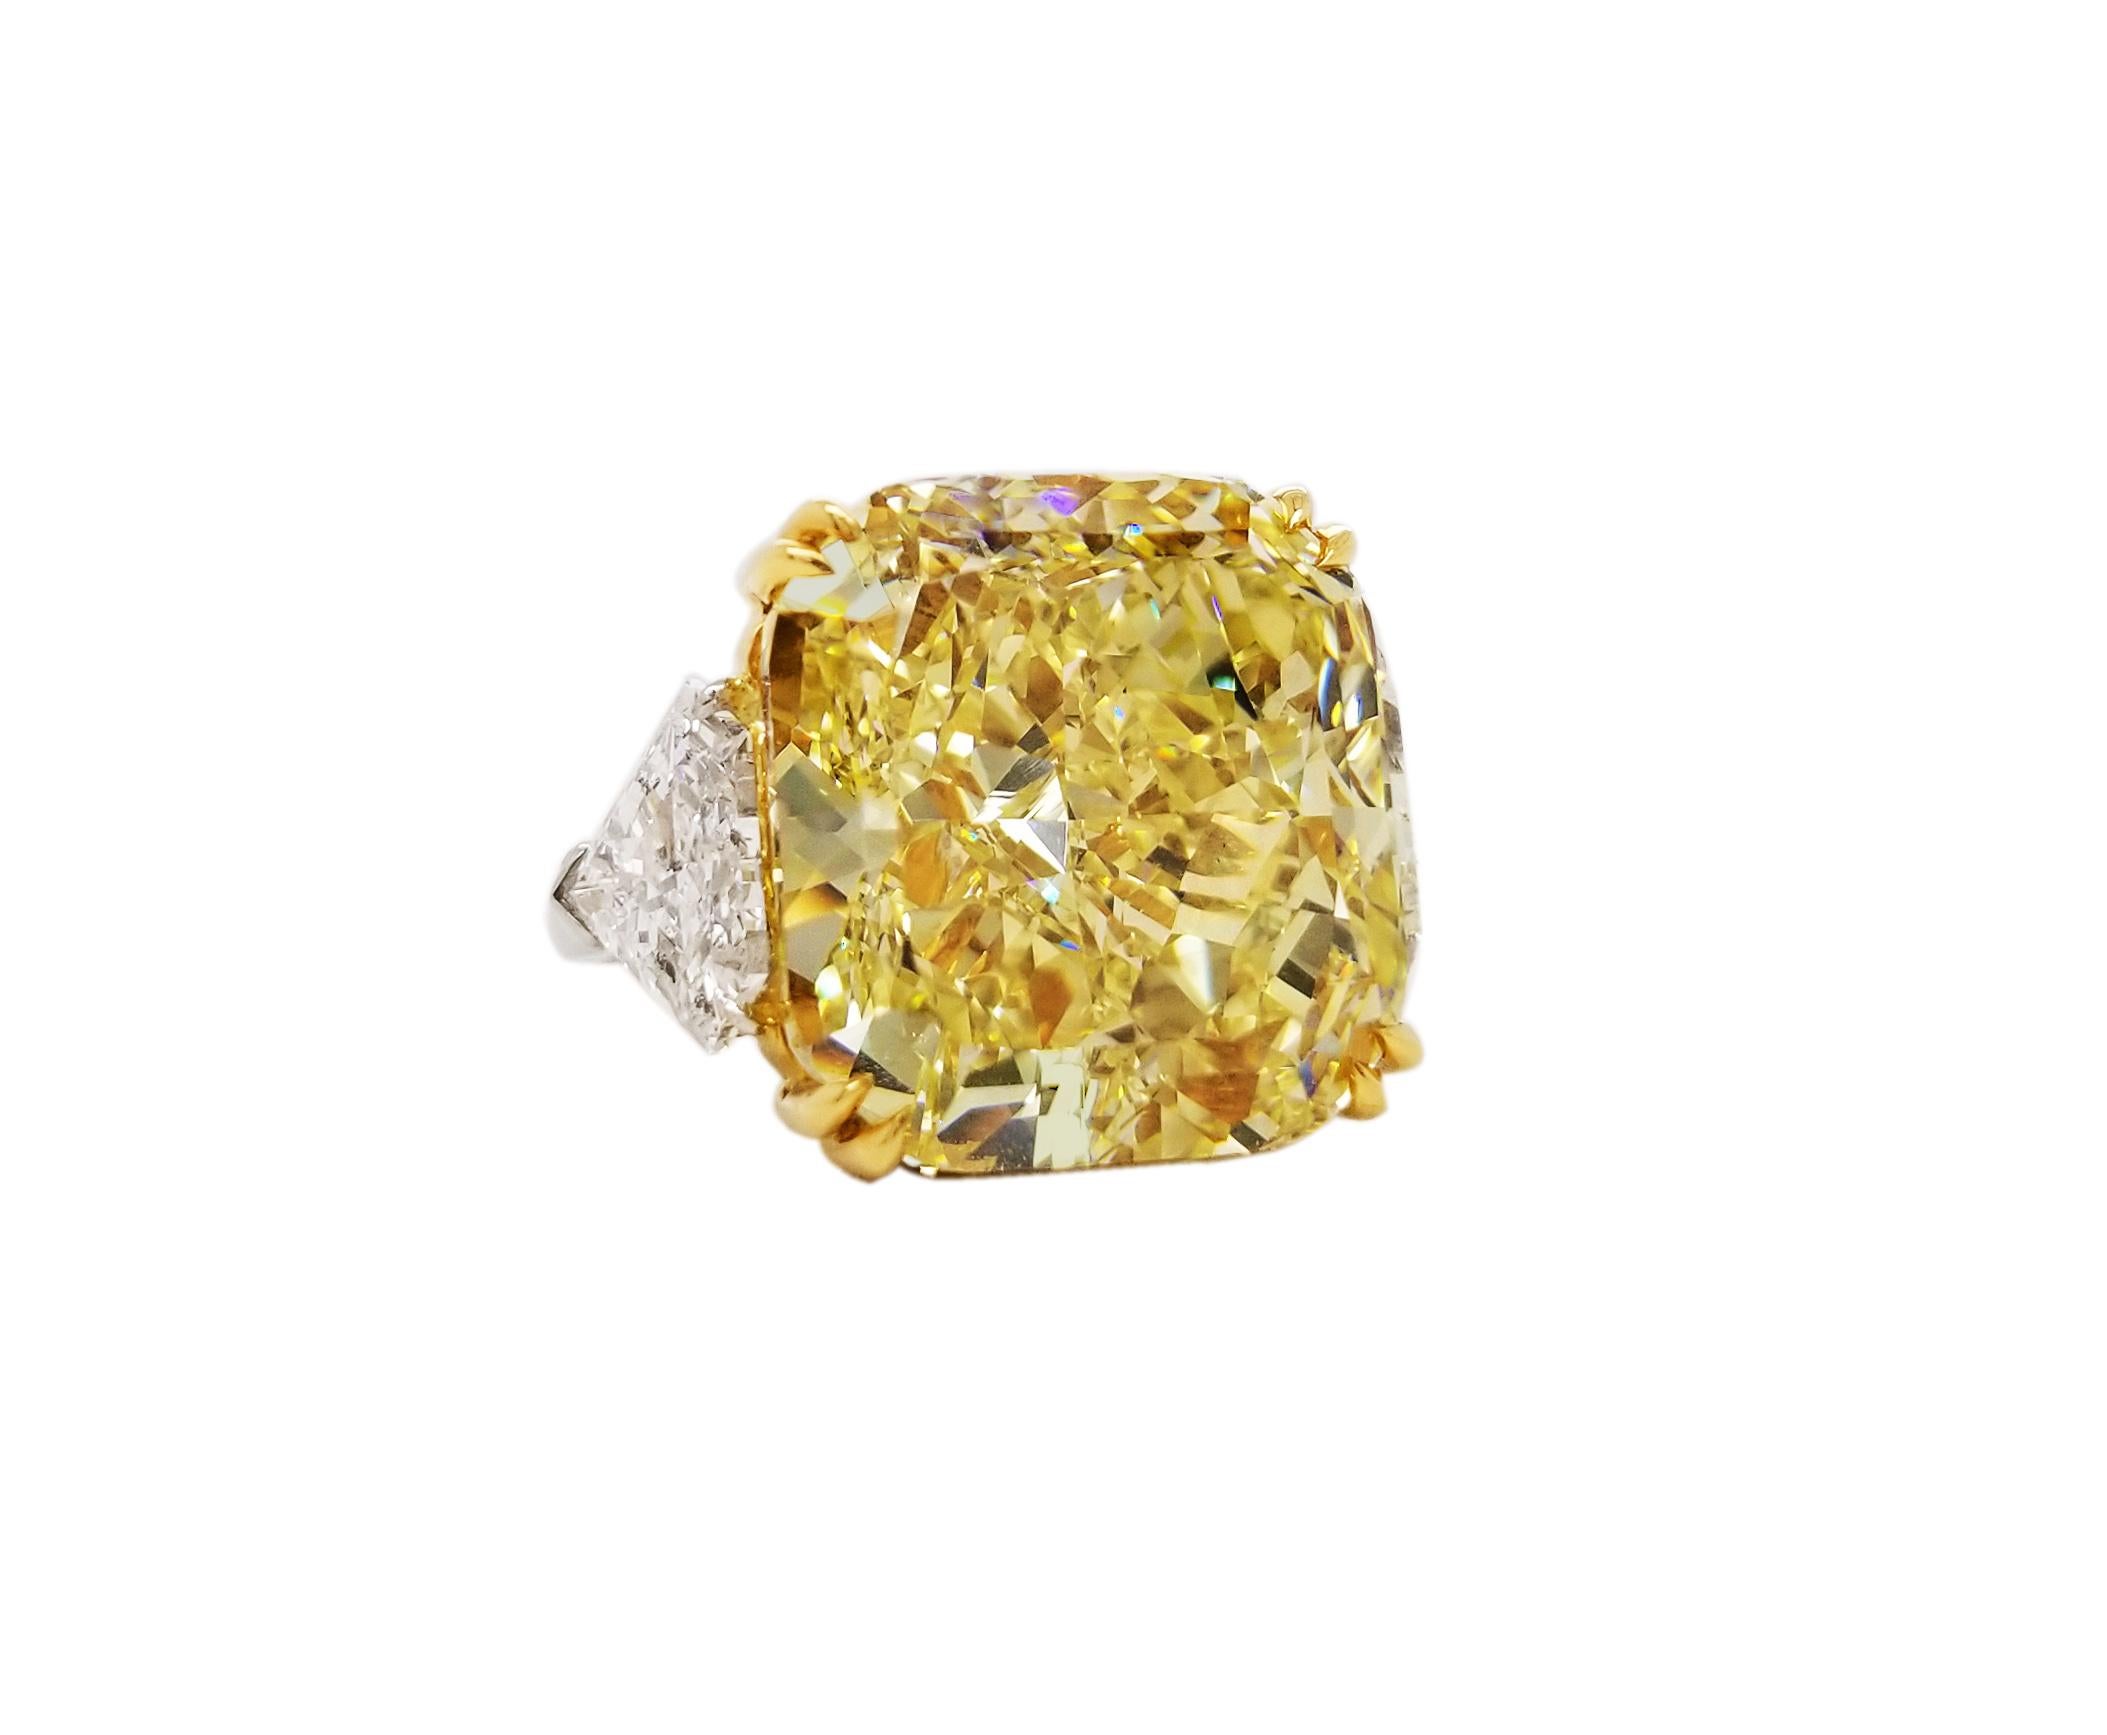 SCARSELLI is featuring a 21 + carat Fancy Intense Yellow Radiant Cut Diamond VVS1 clarity, certified by GIA ( see certificate picture for detailed stone information ) flanked by a pair of trilliant VS diamonds totaling 0.85 carats set in handmade